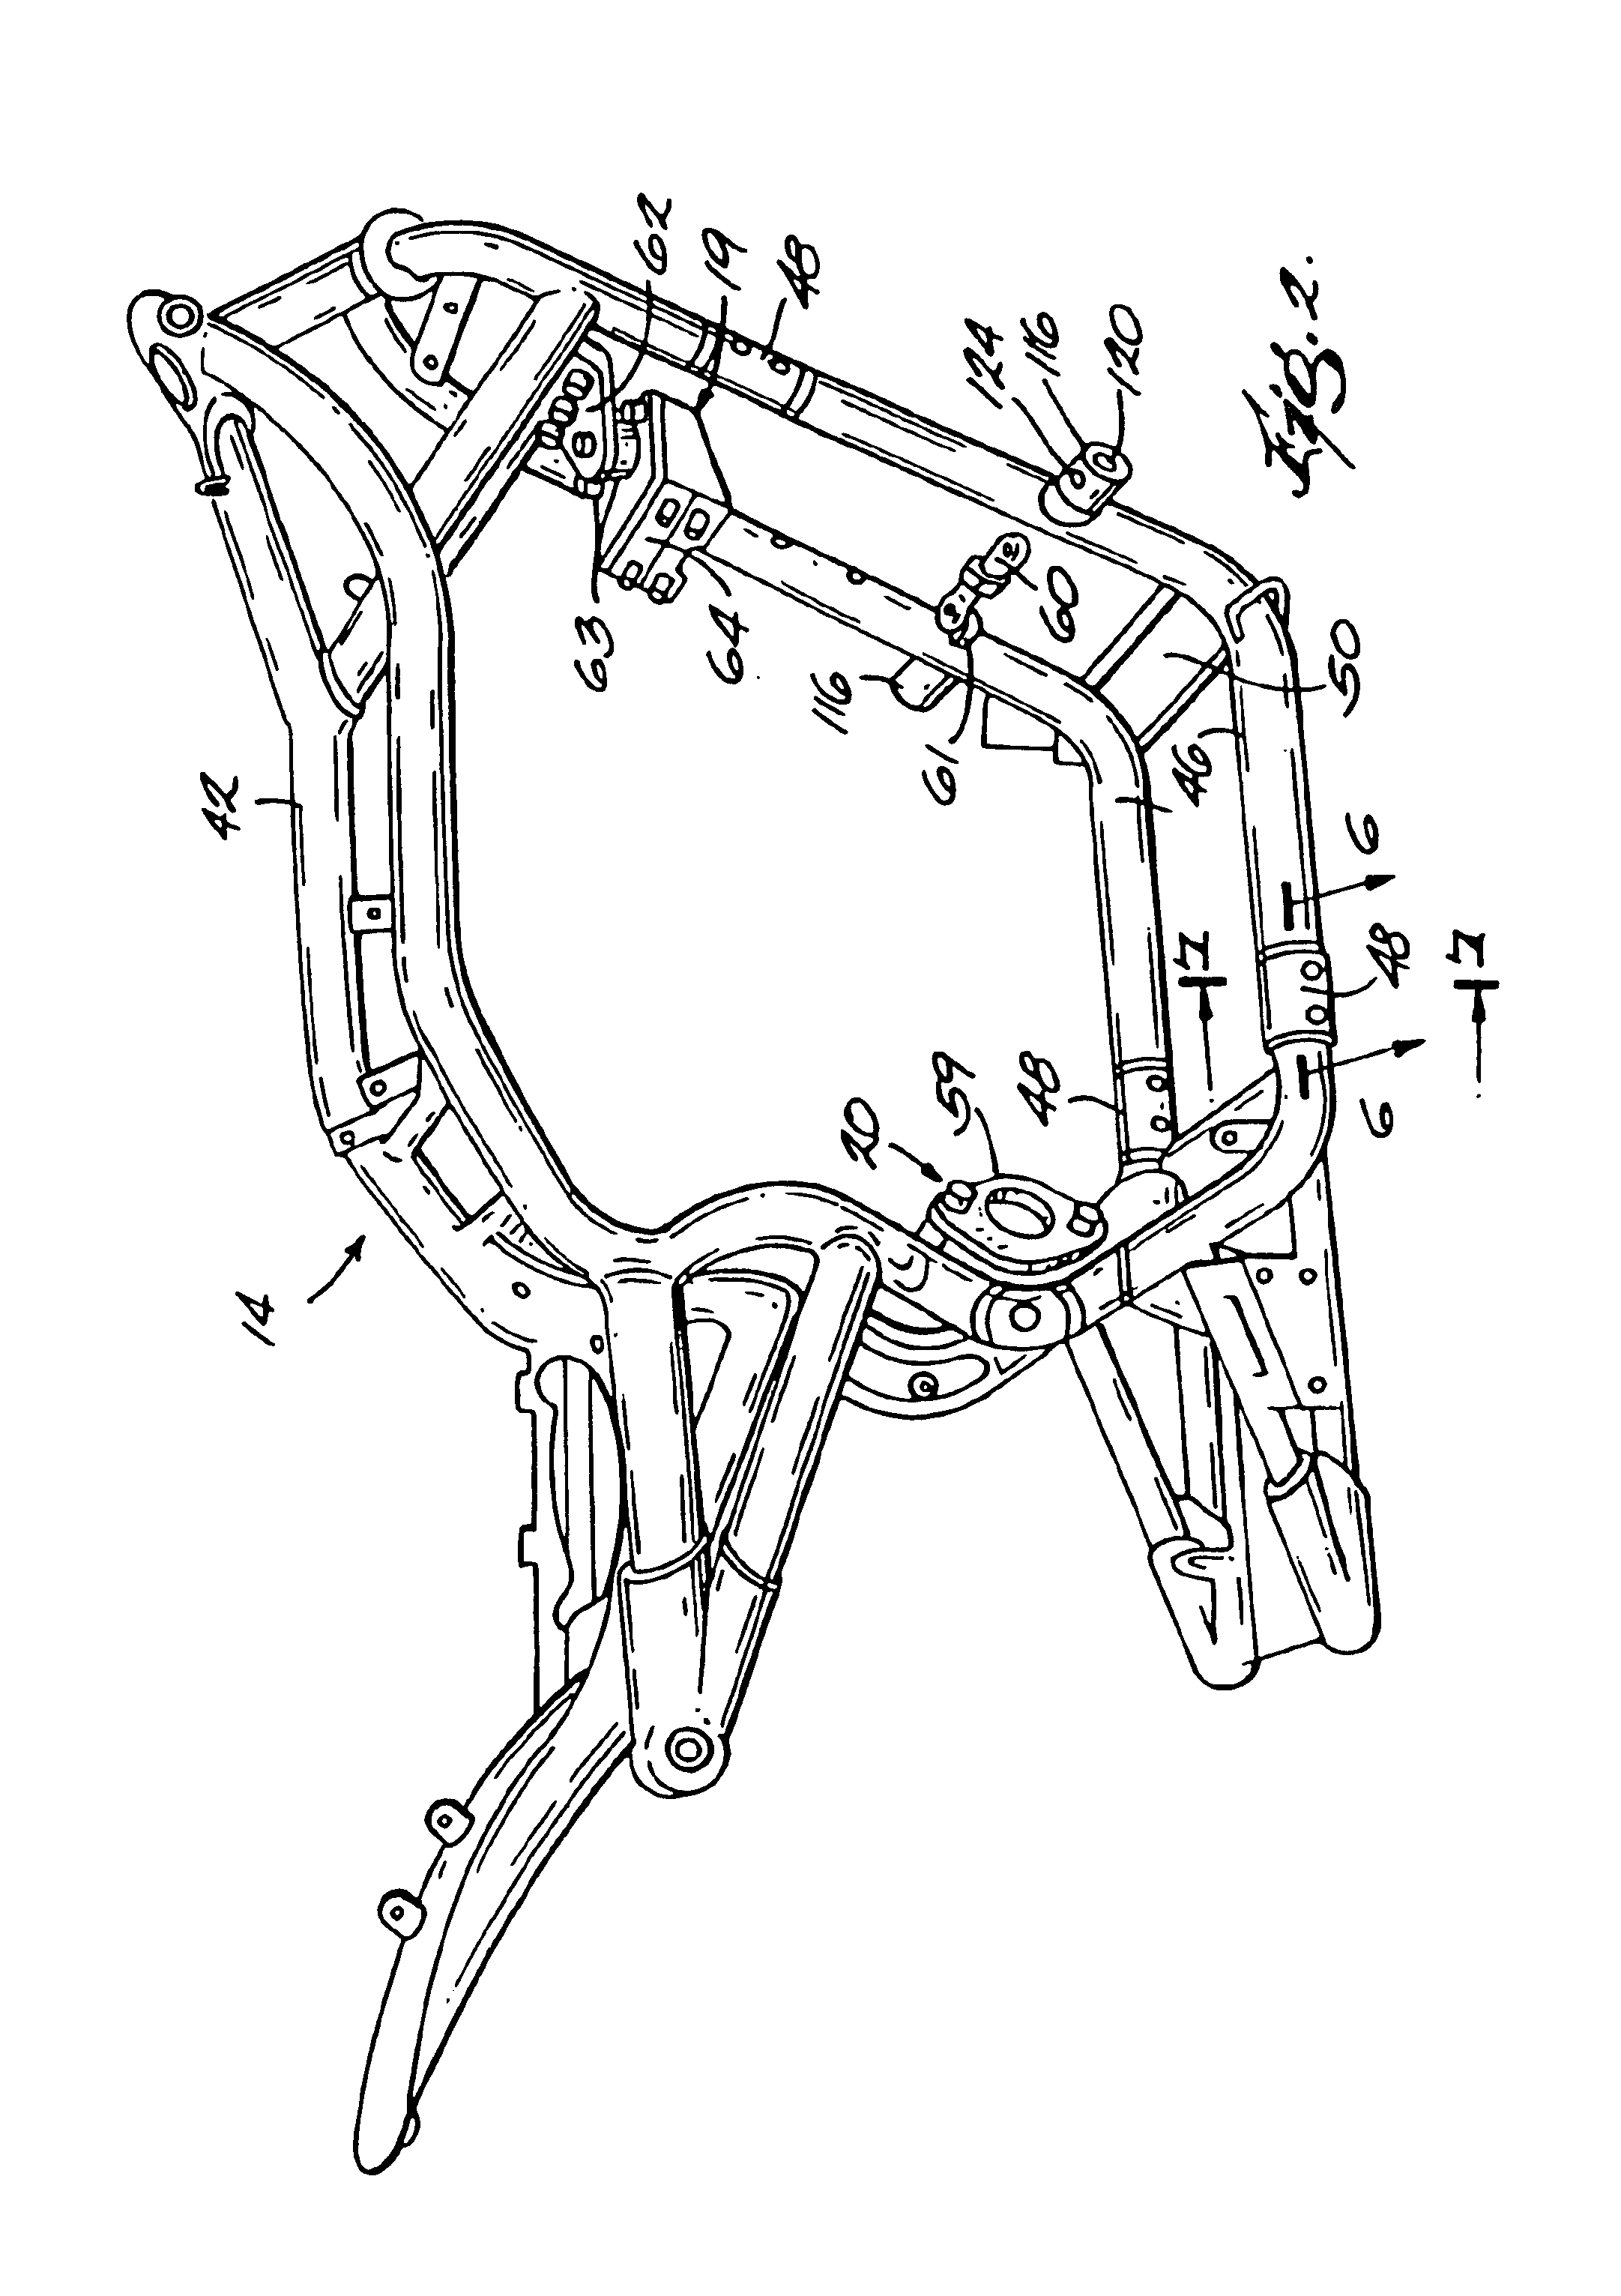 Motorcycle frame having removable portion